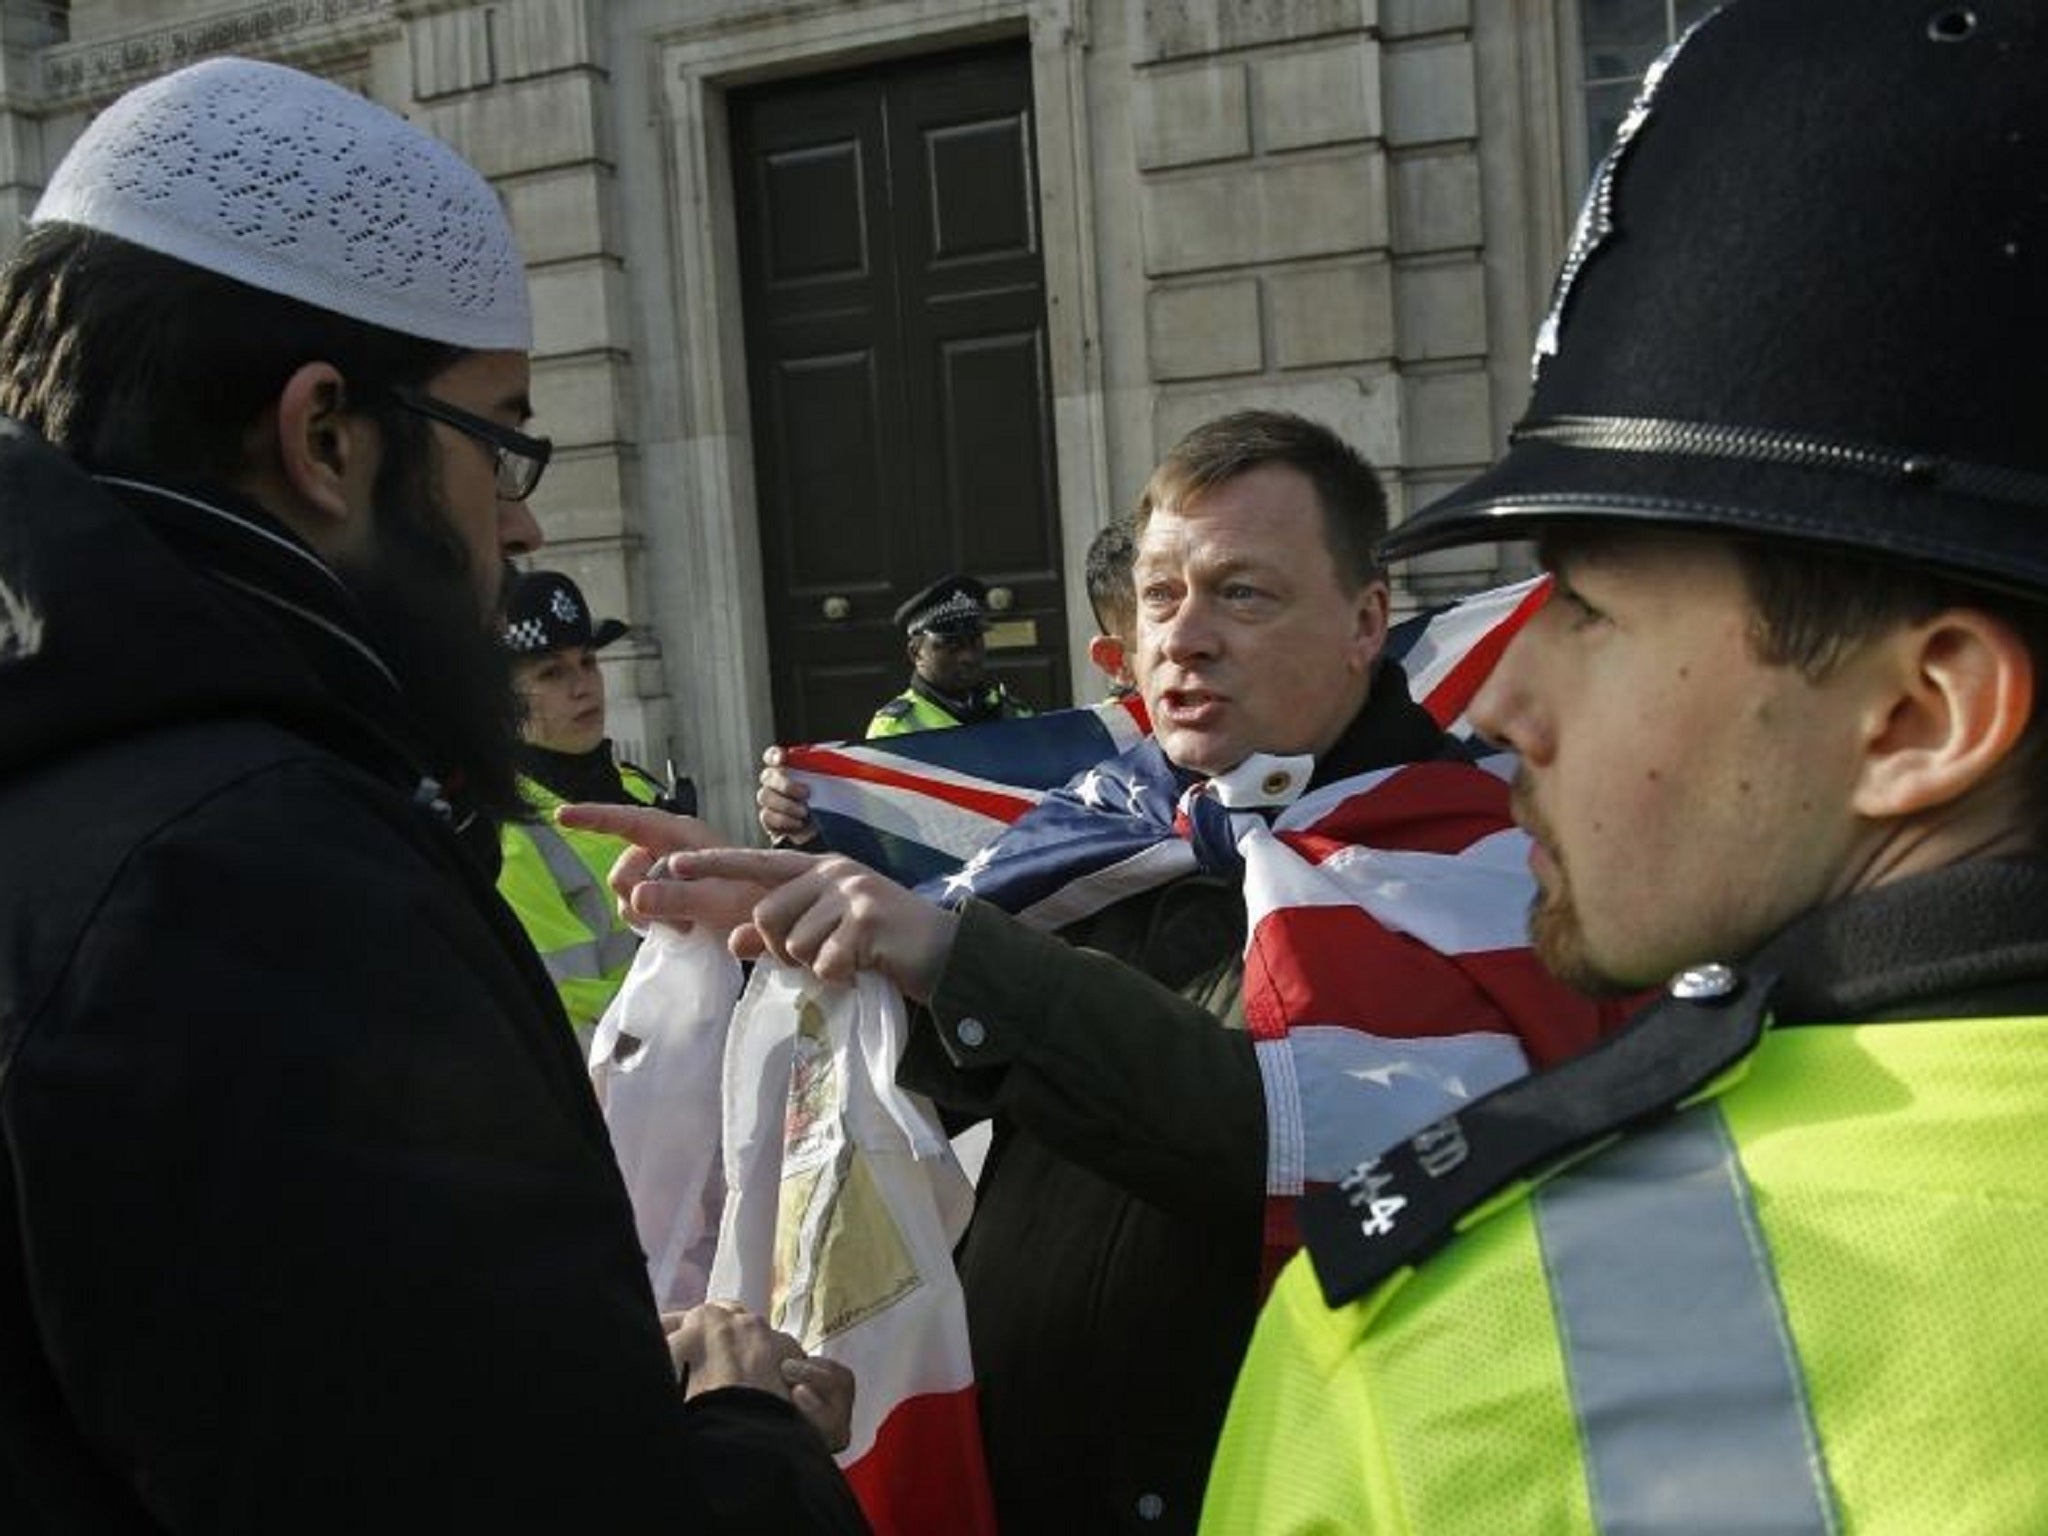 A member of Britain First talking with a Muslim protester on Whitehall